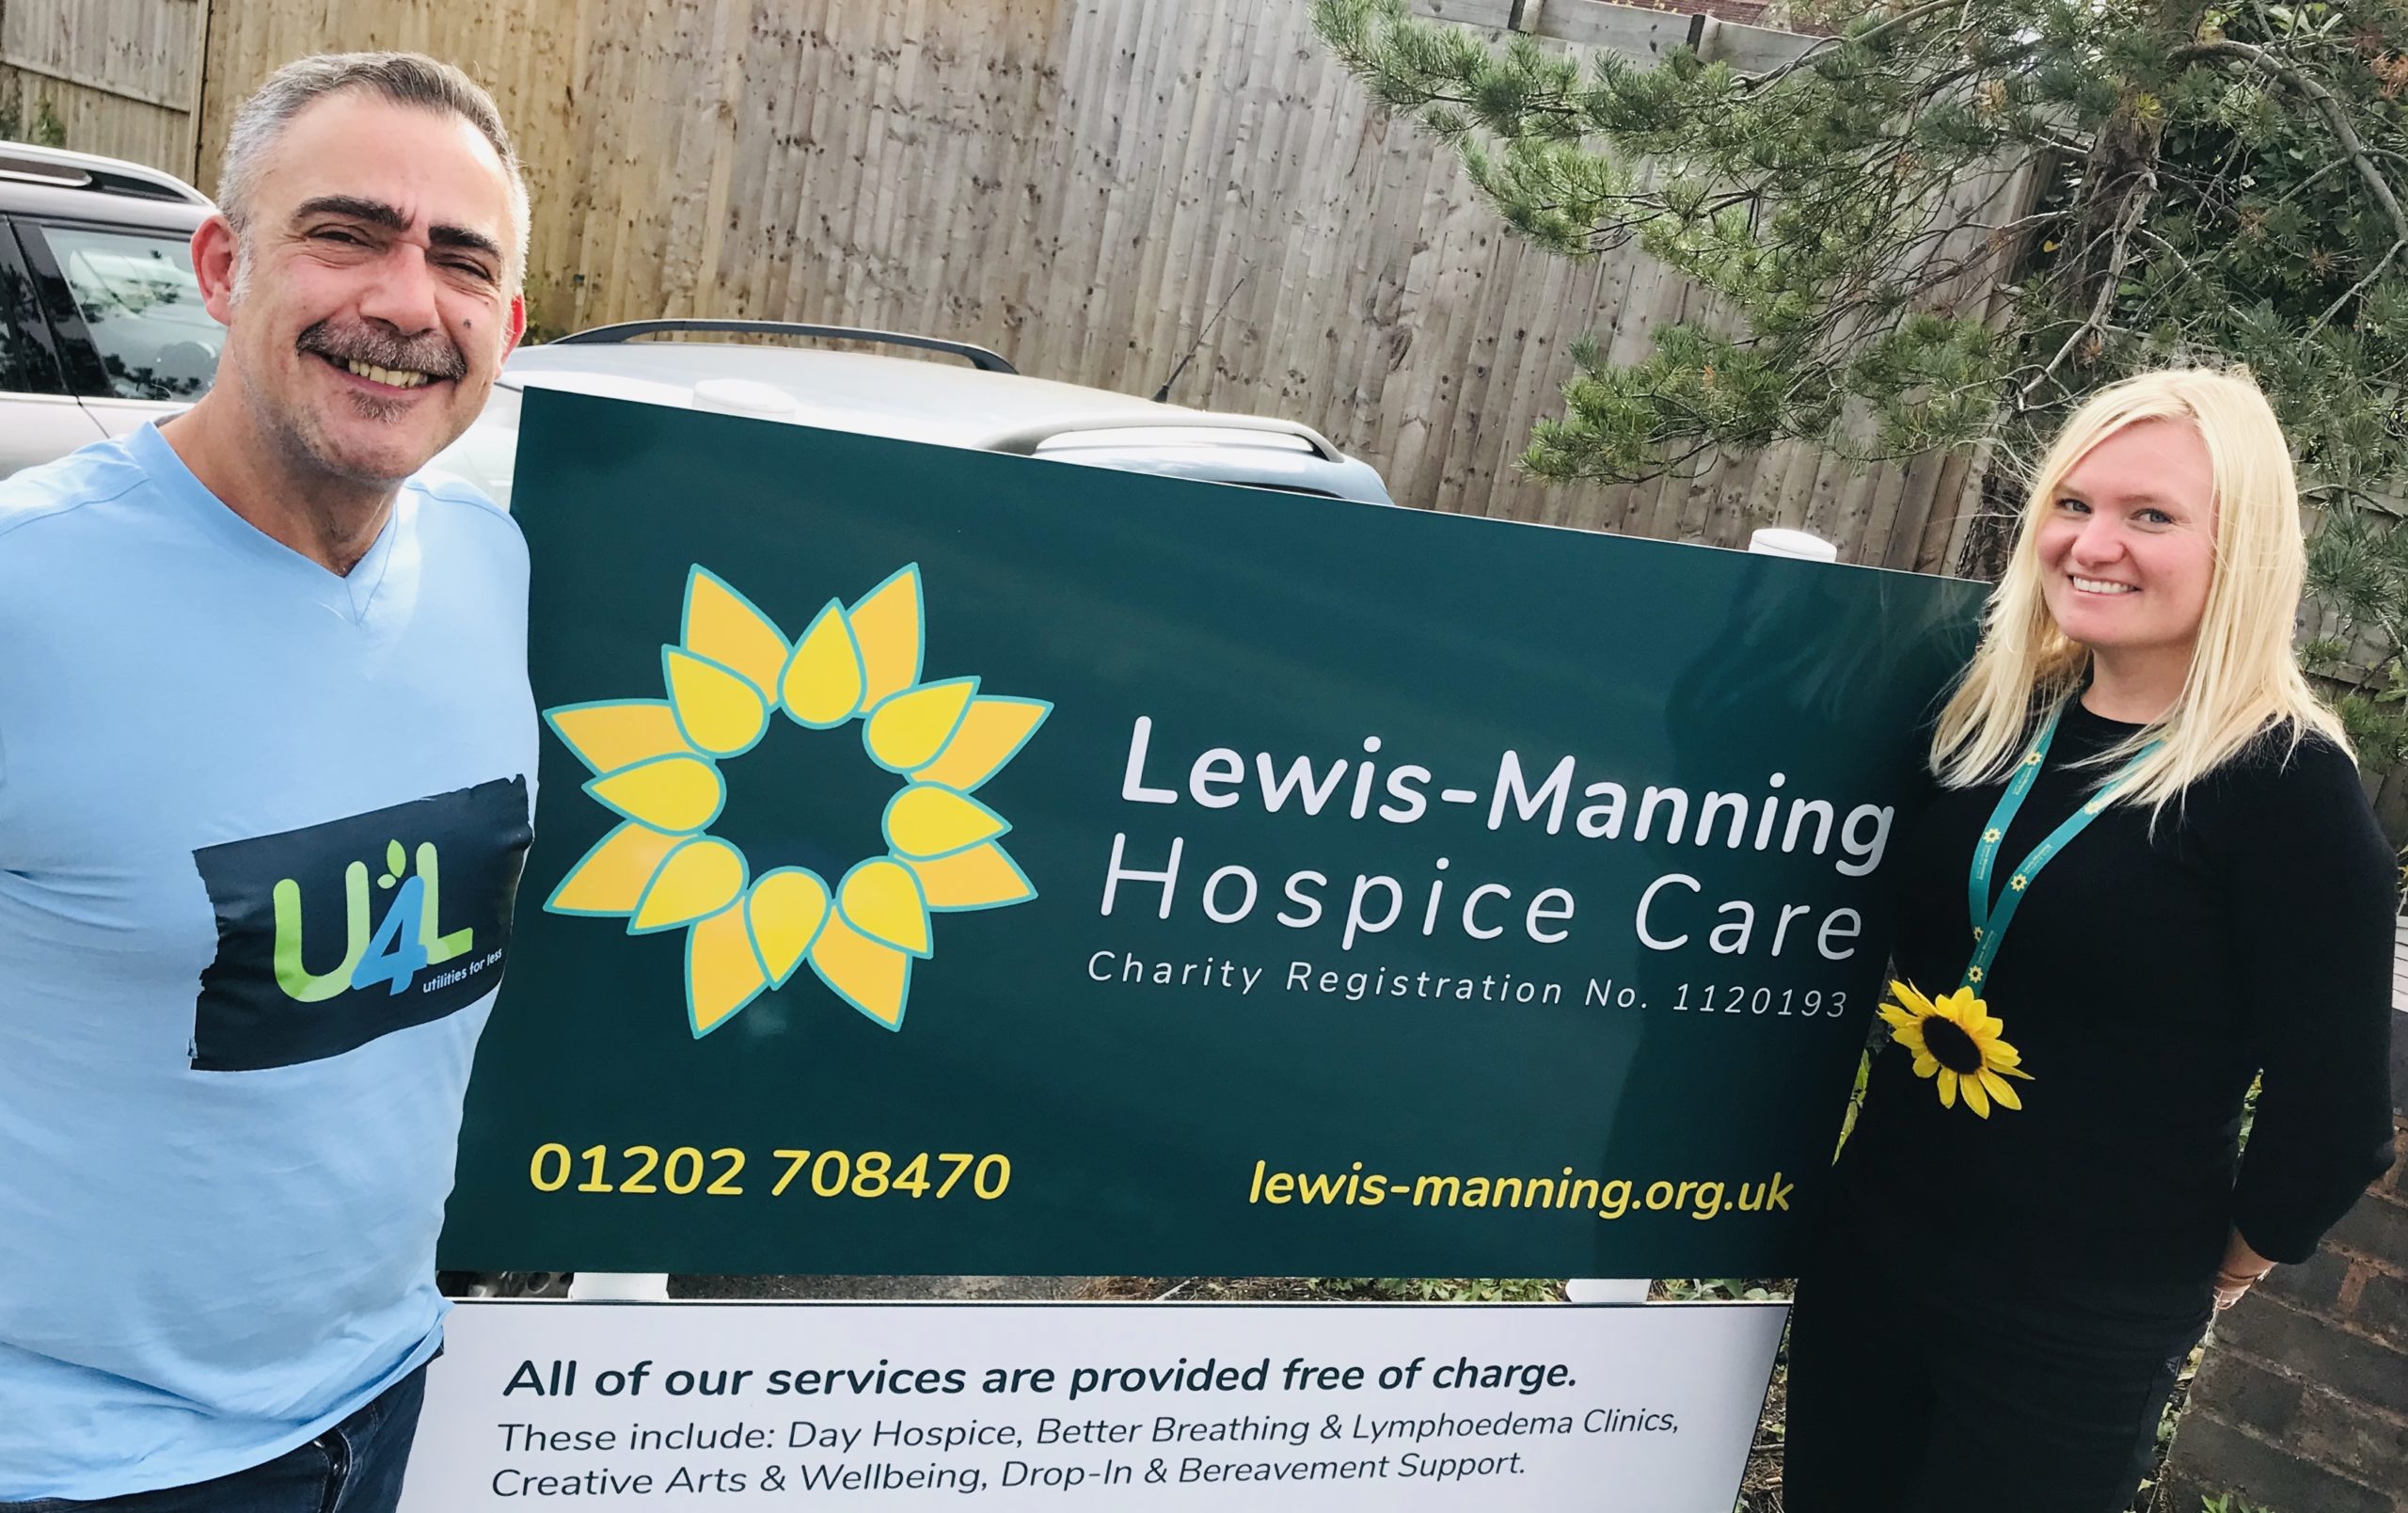 Utilities4Less name Lewis-Manning Hospice Care as charity partner of the year